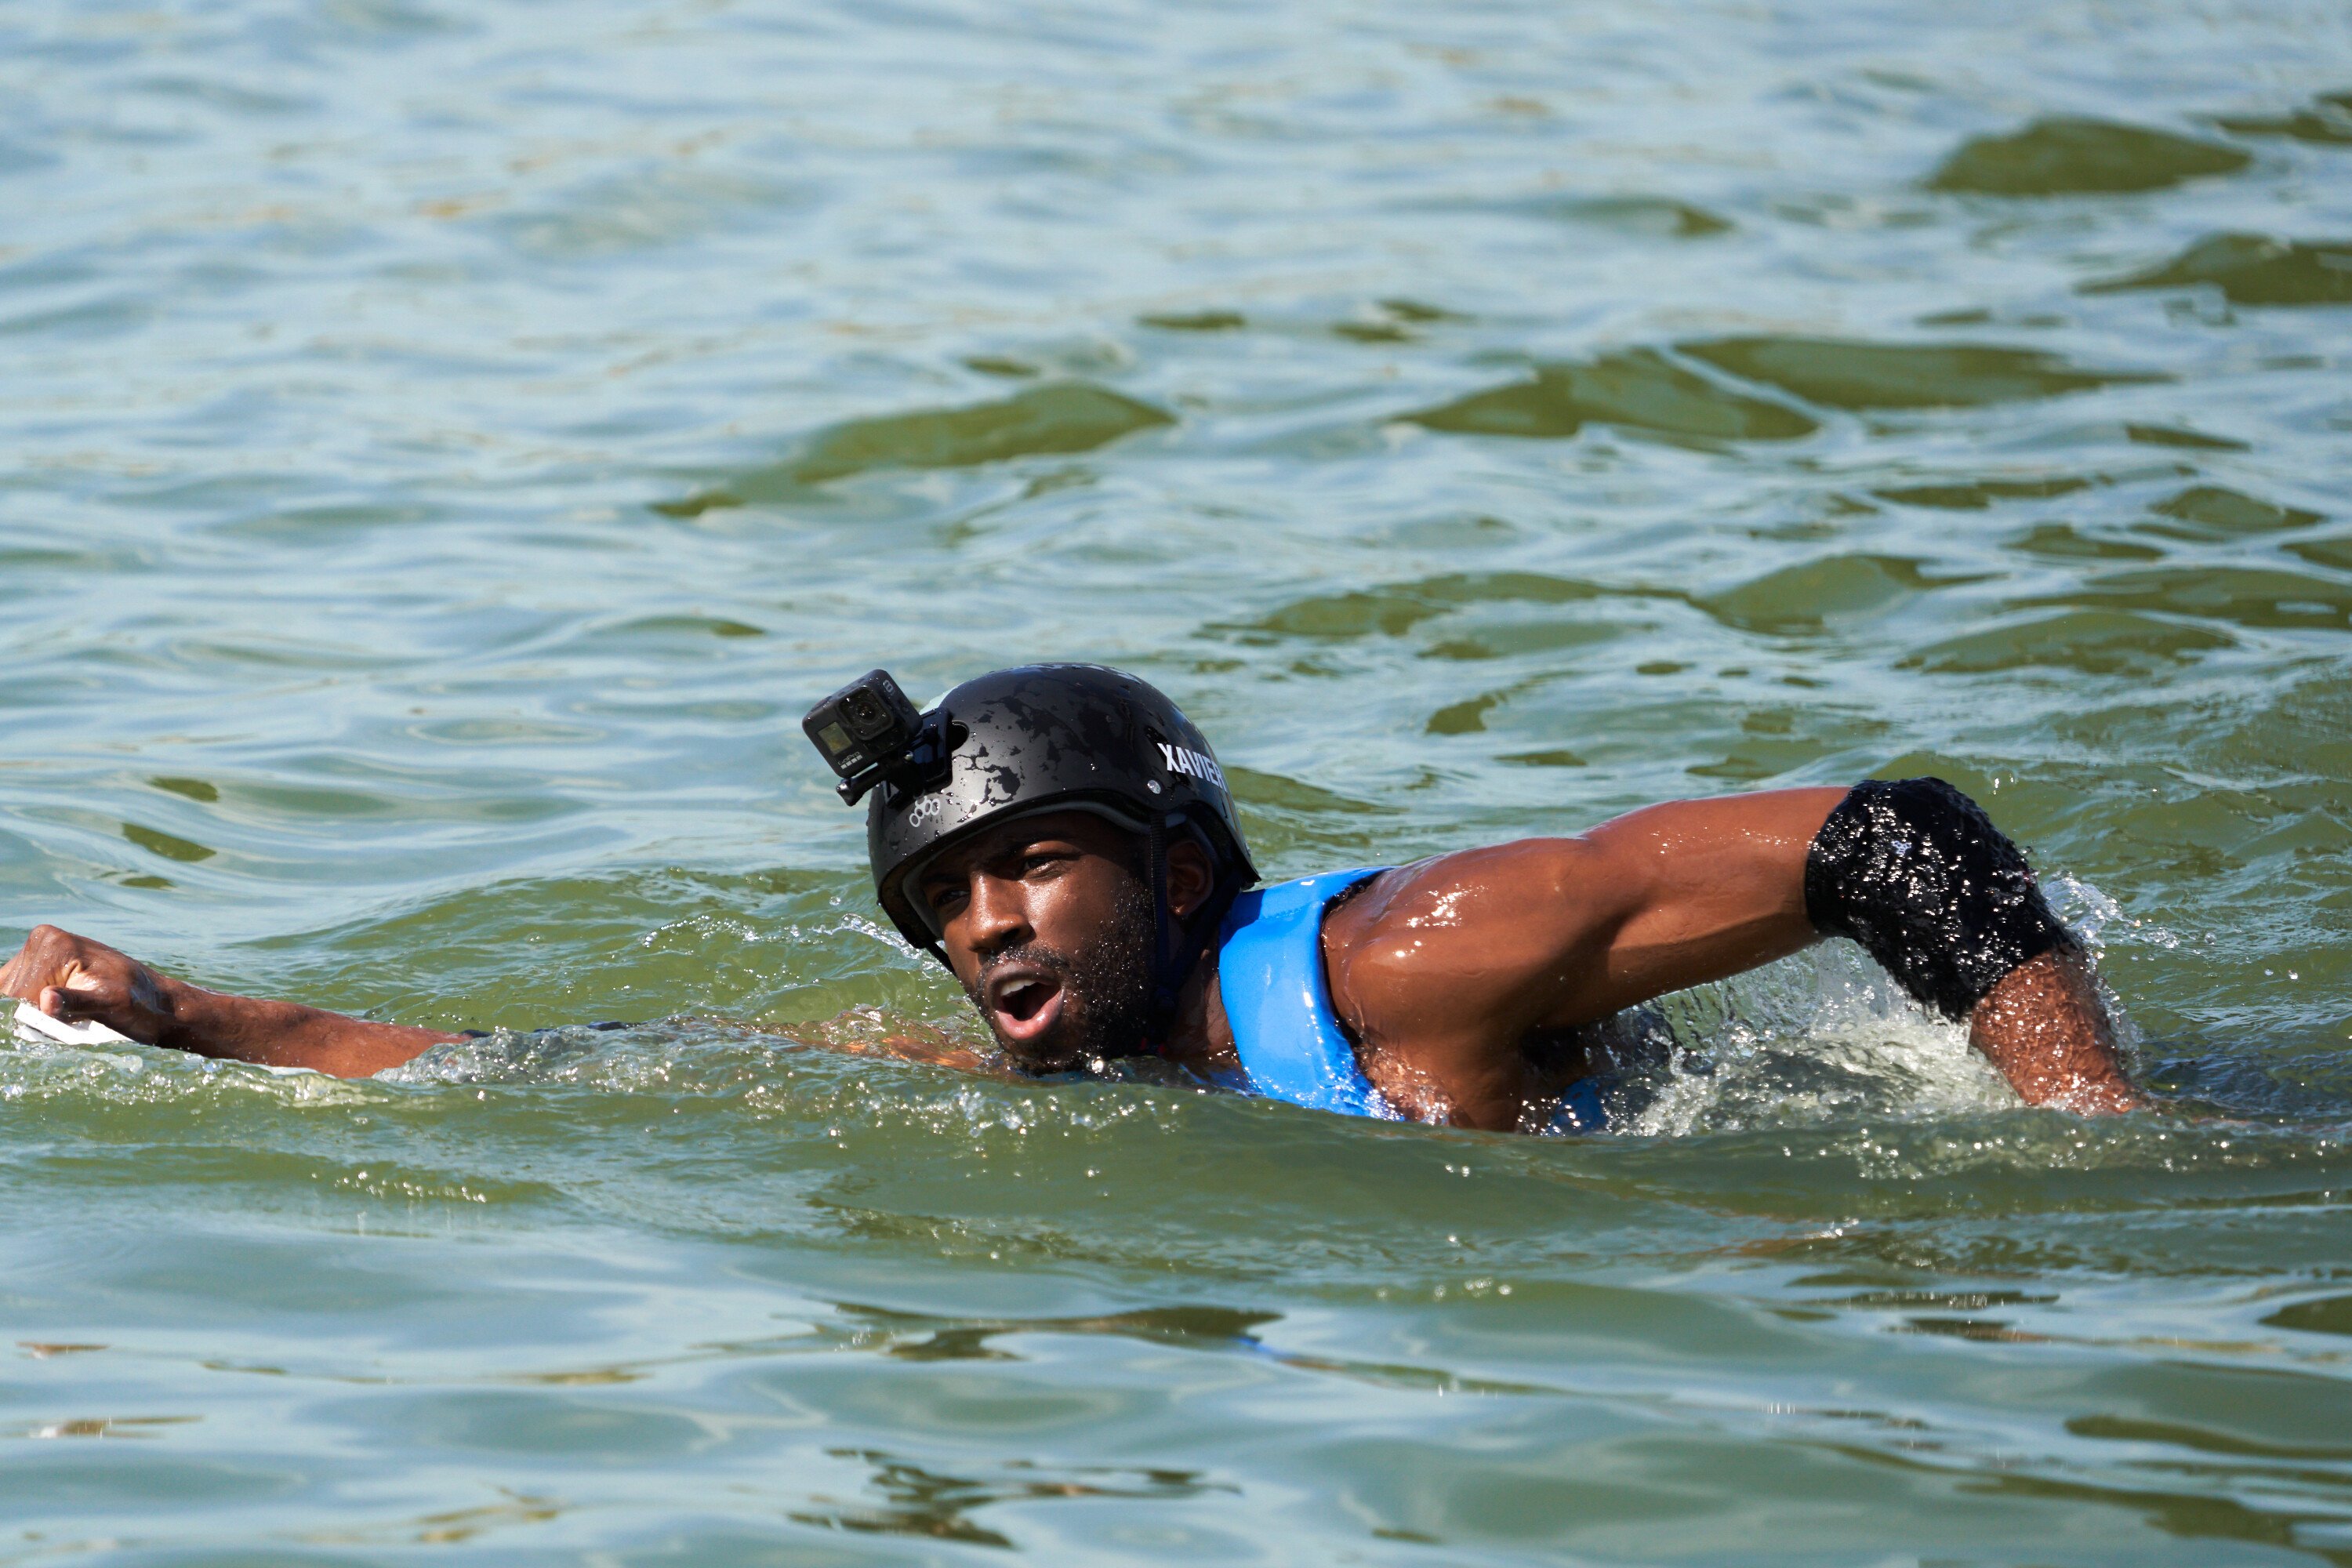 Xavier Prather swimming during a daily mission in 'The Challenge: USA'